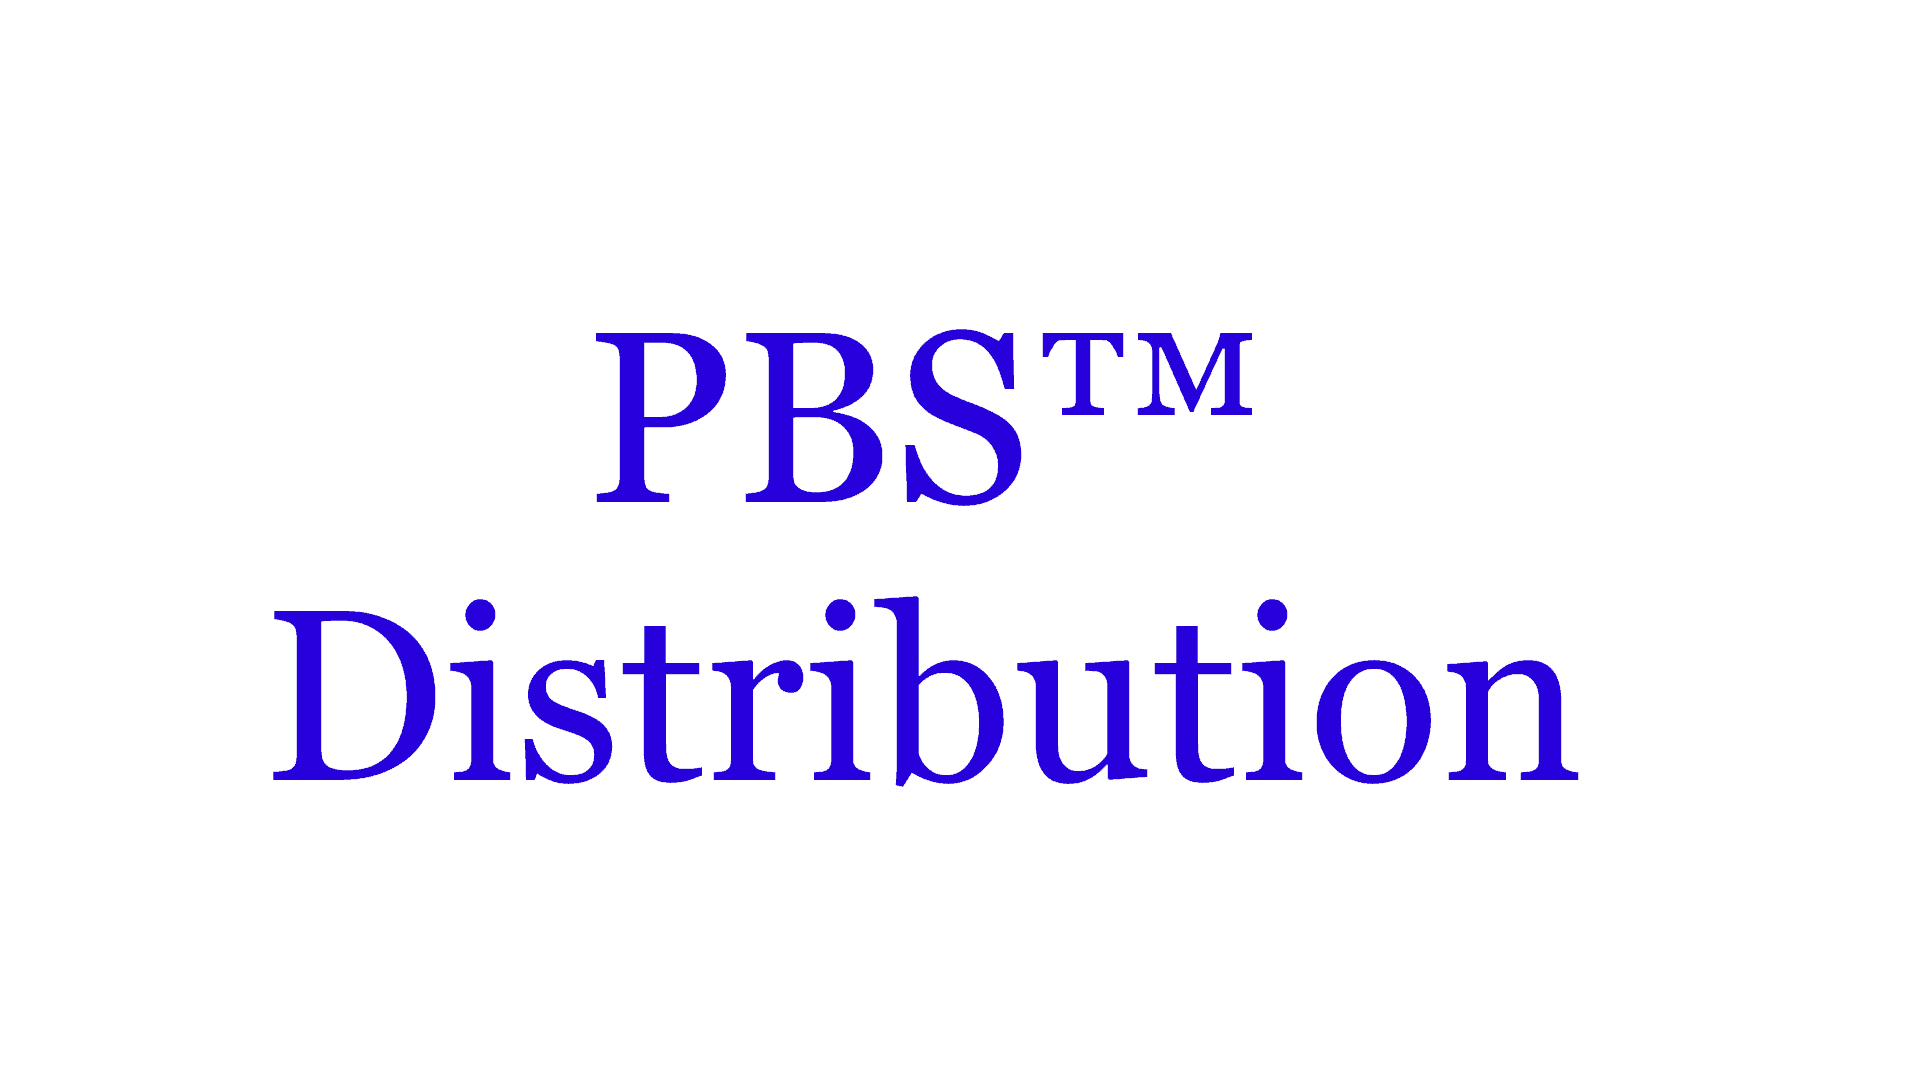 logo for pbs distribution software for small business